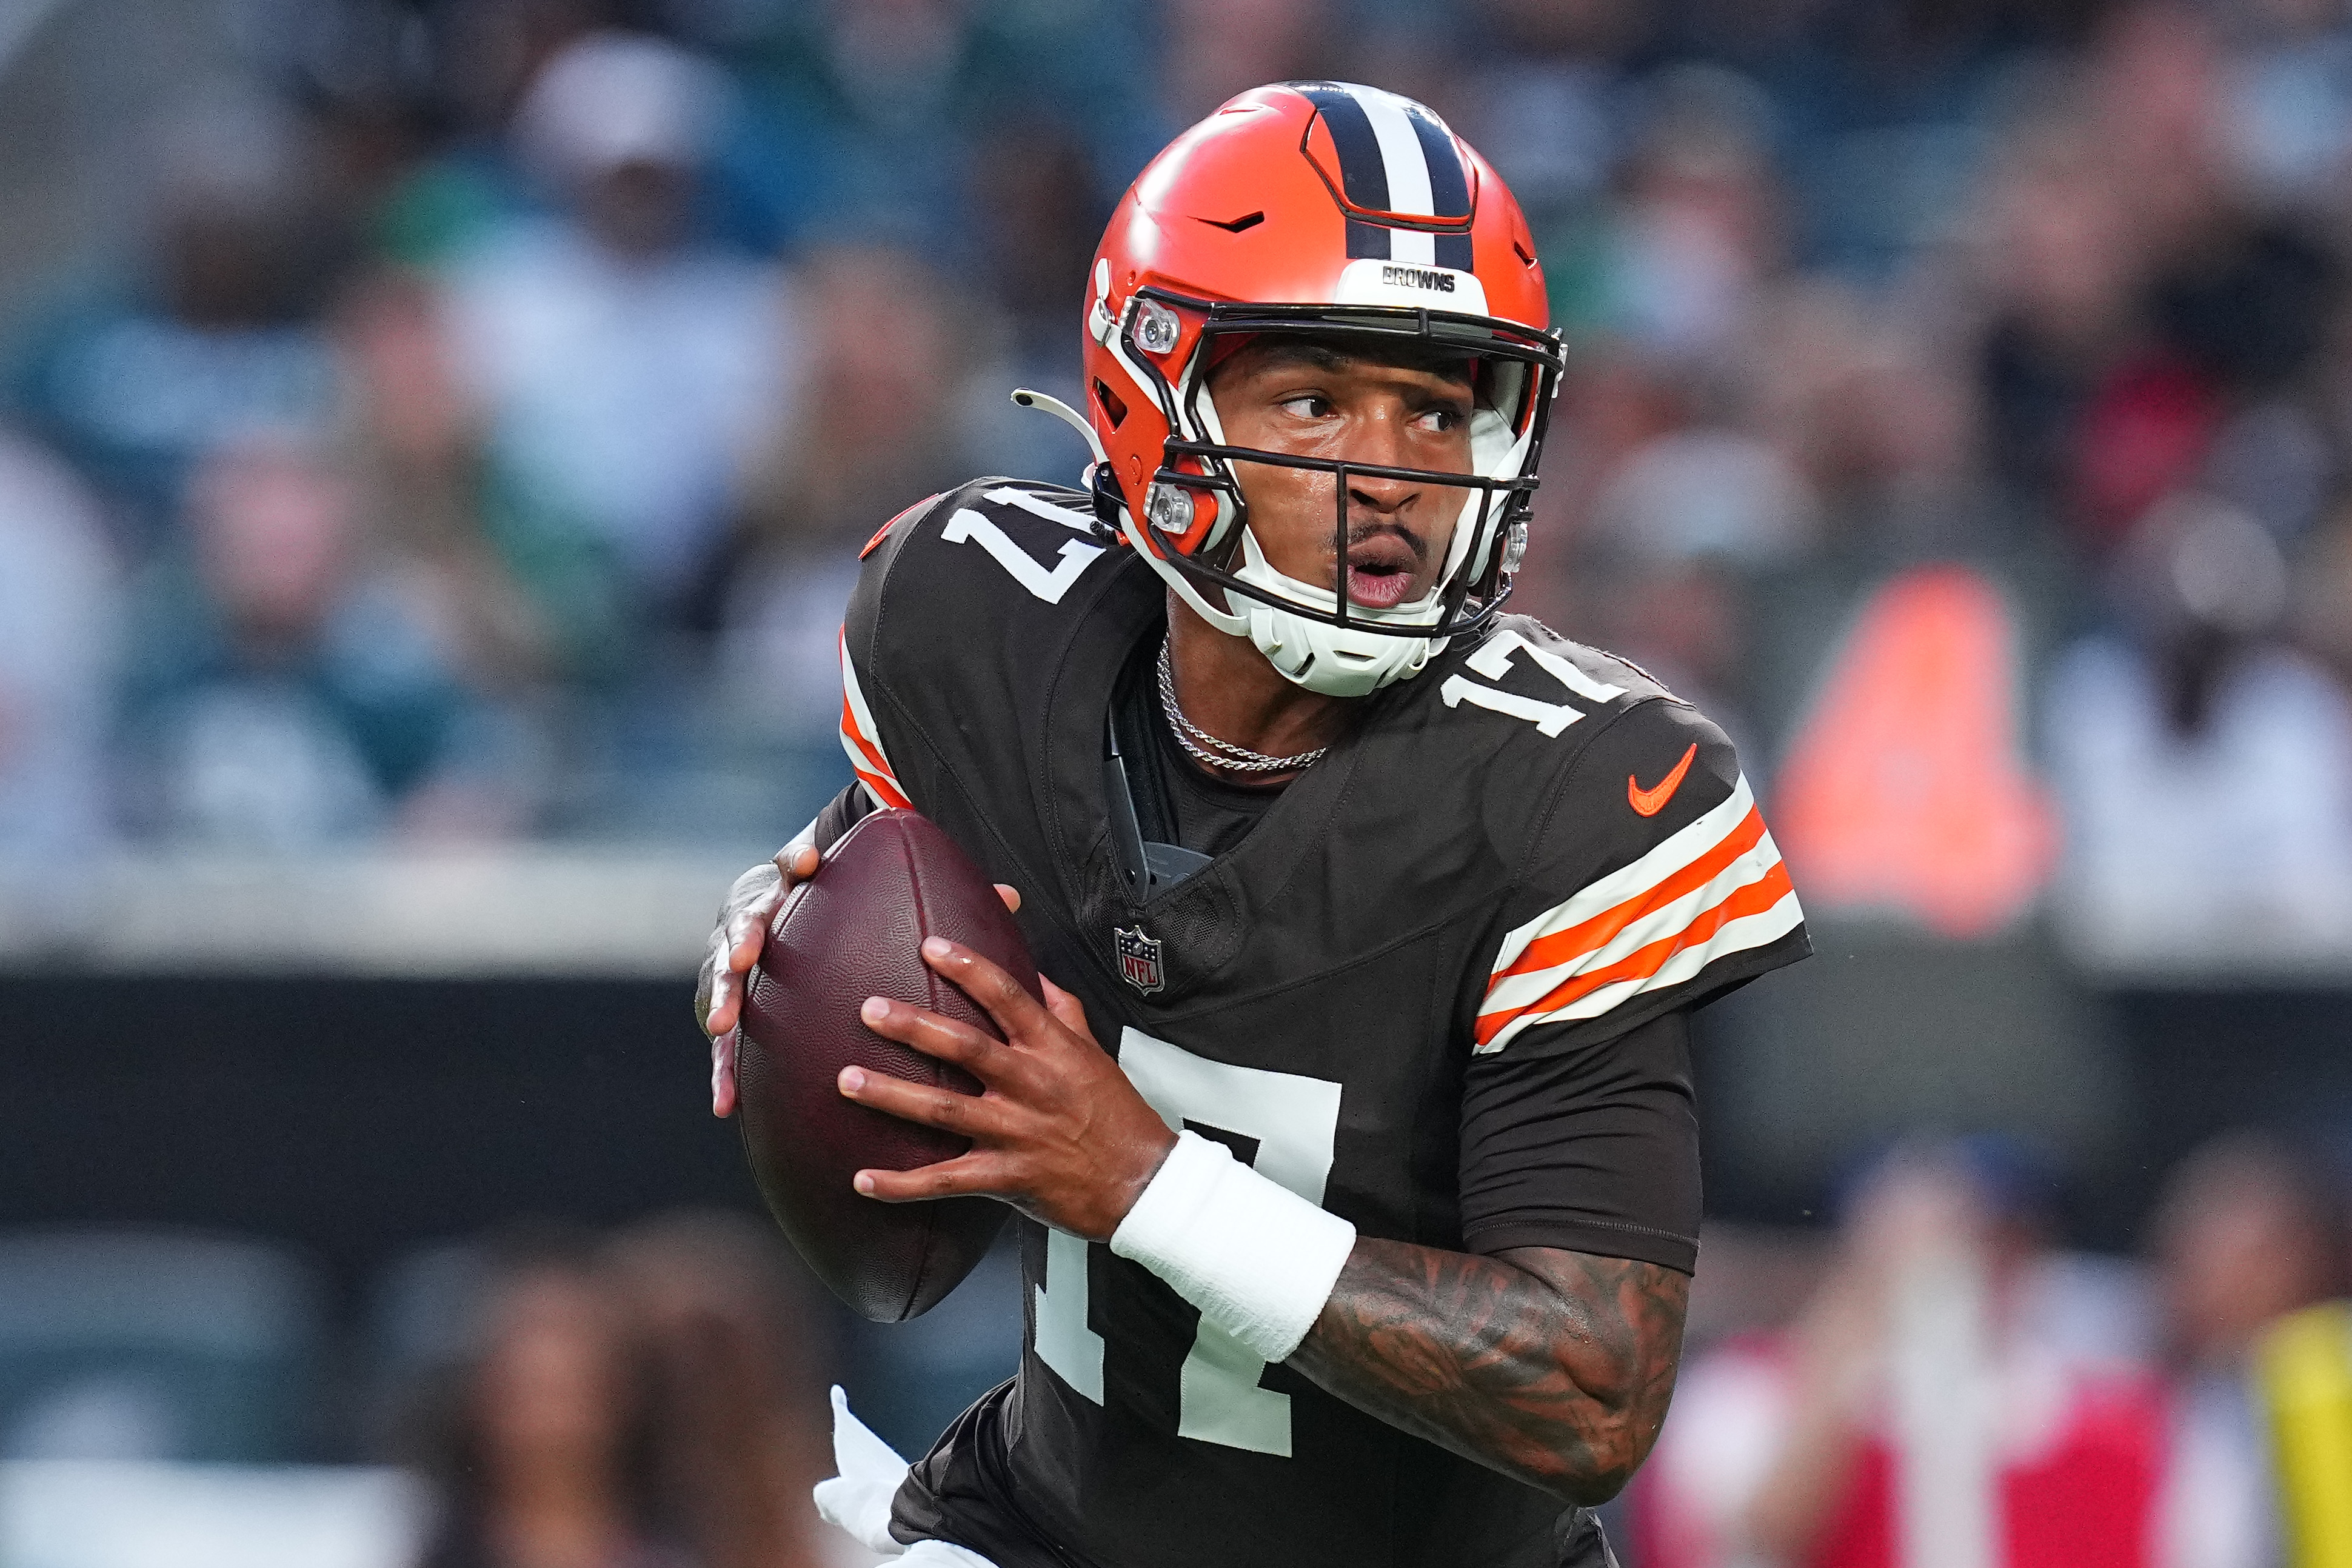 PHILADELPHIA, PENNSYLVANIA - AUGUST 17: Dorian Thompson-Robinson #17 of the Cleveland Browns looks to pass the ball against the Philadelphia Eagles during the preseason game at Lincoln Financial Field on August 17, 2023 in Philadelphia, Pennsylvania. The Browns tied the Eagles 18-18. 